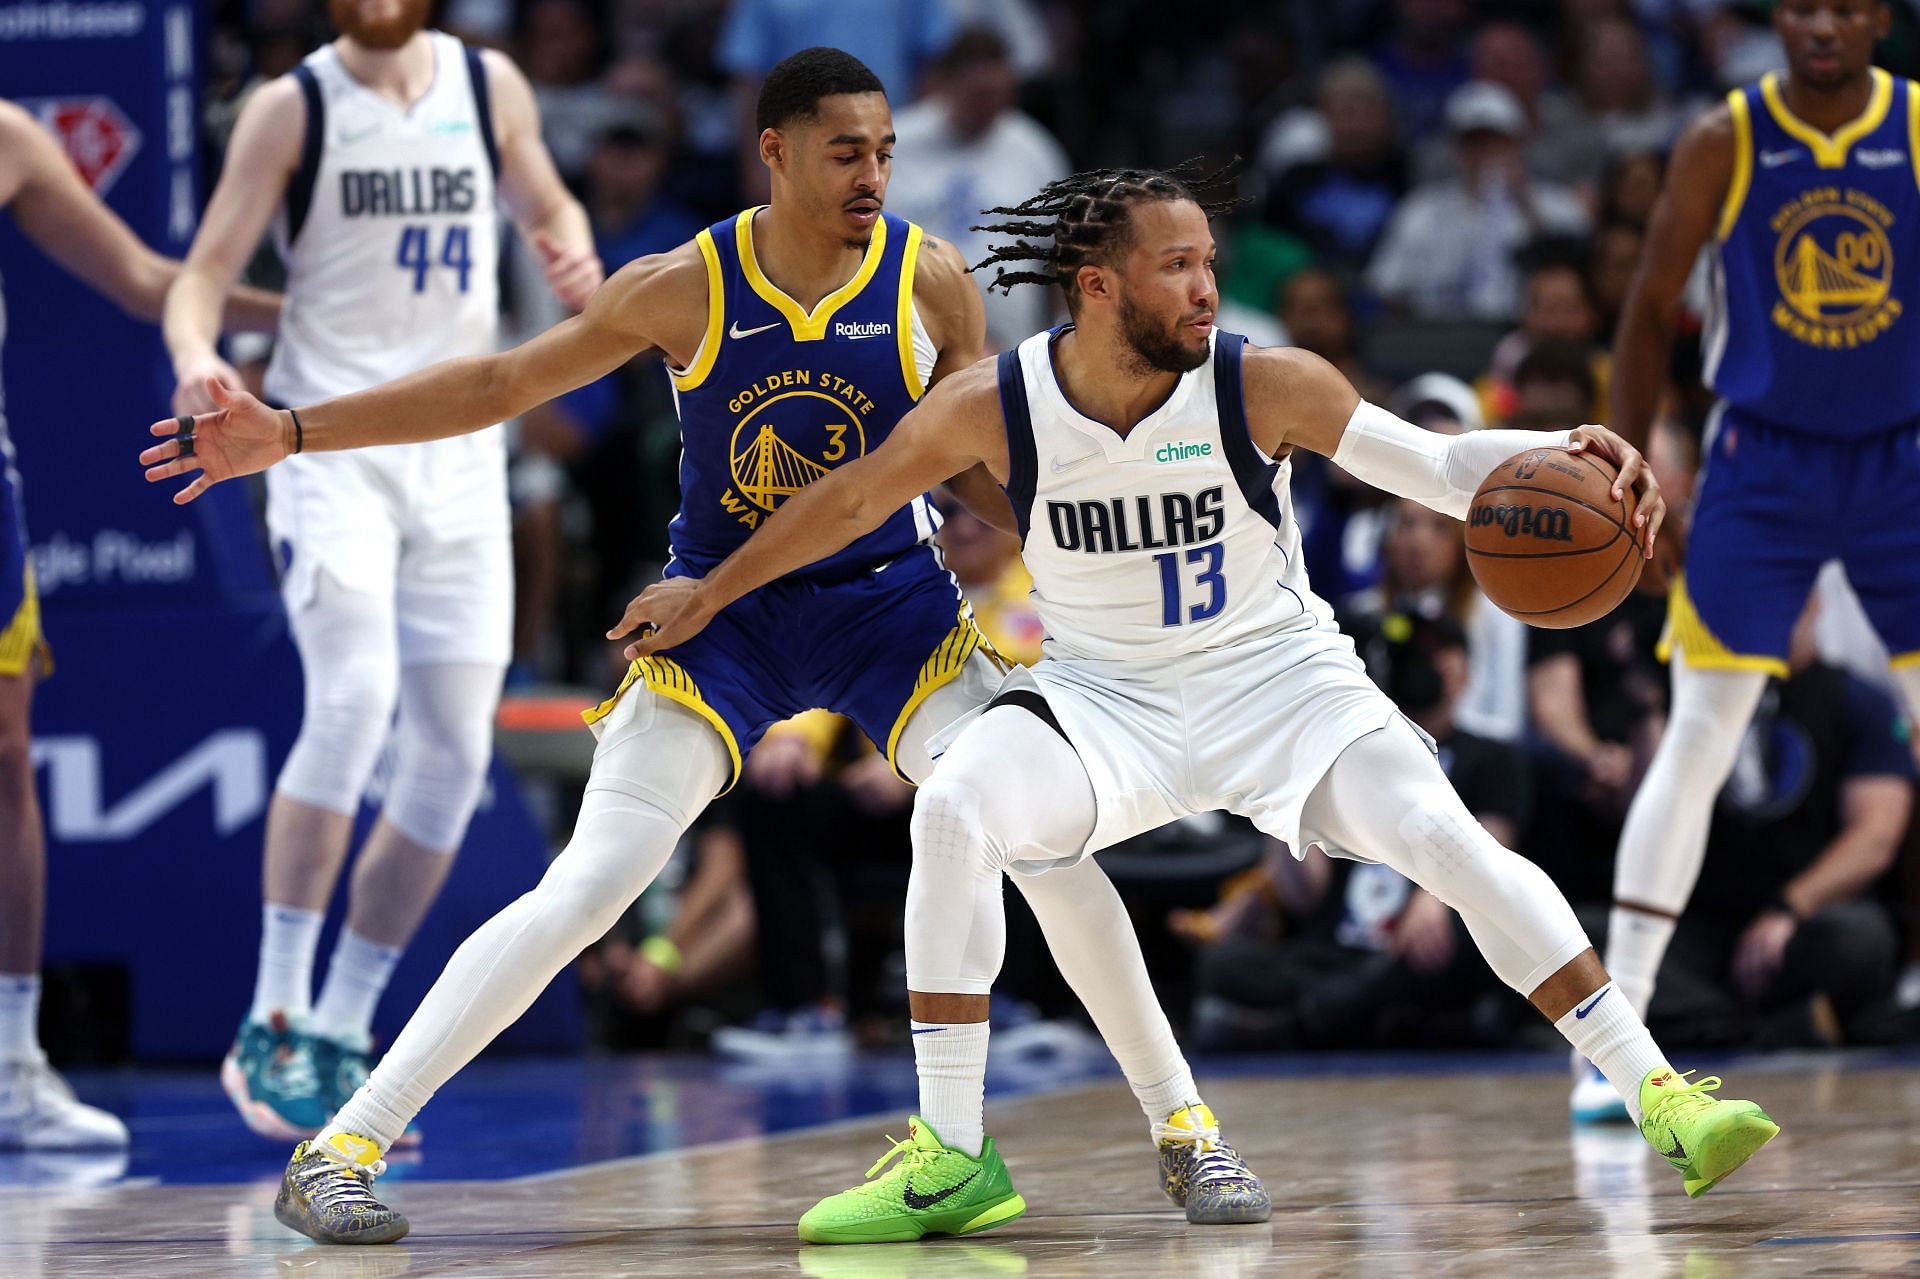 Jalen Brunson has exponentially improved his game in the last two years, and is now a reliable scoring option for the Dallas Mavericks.